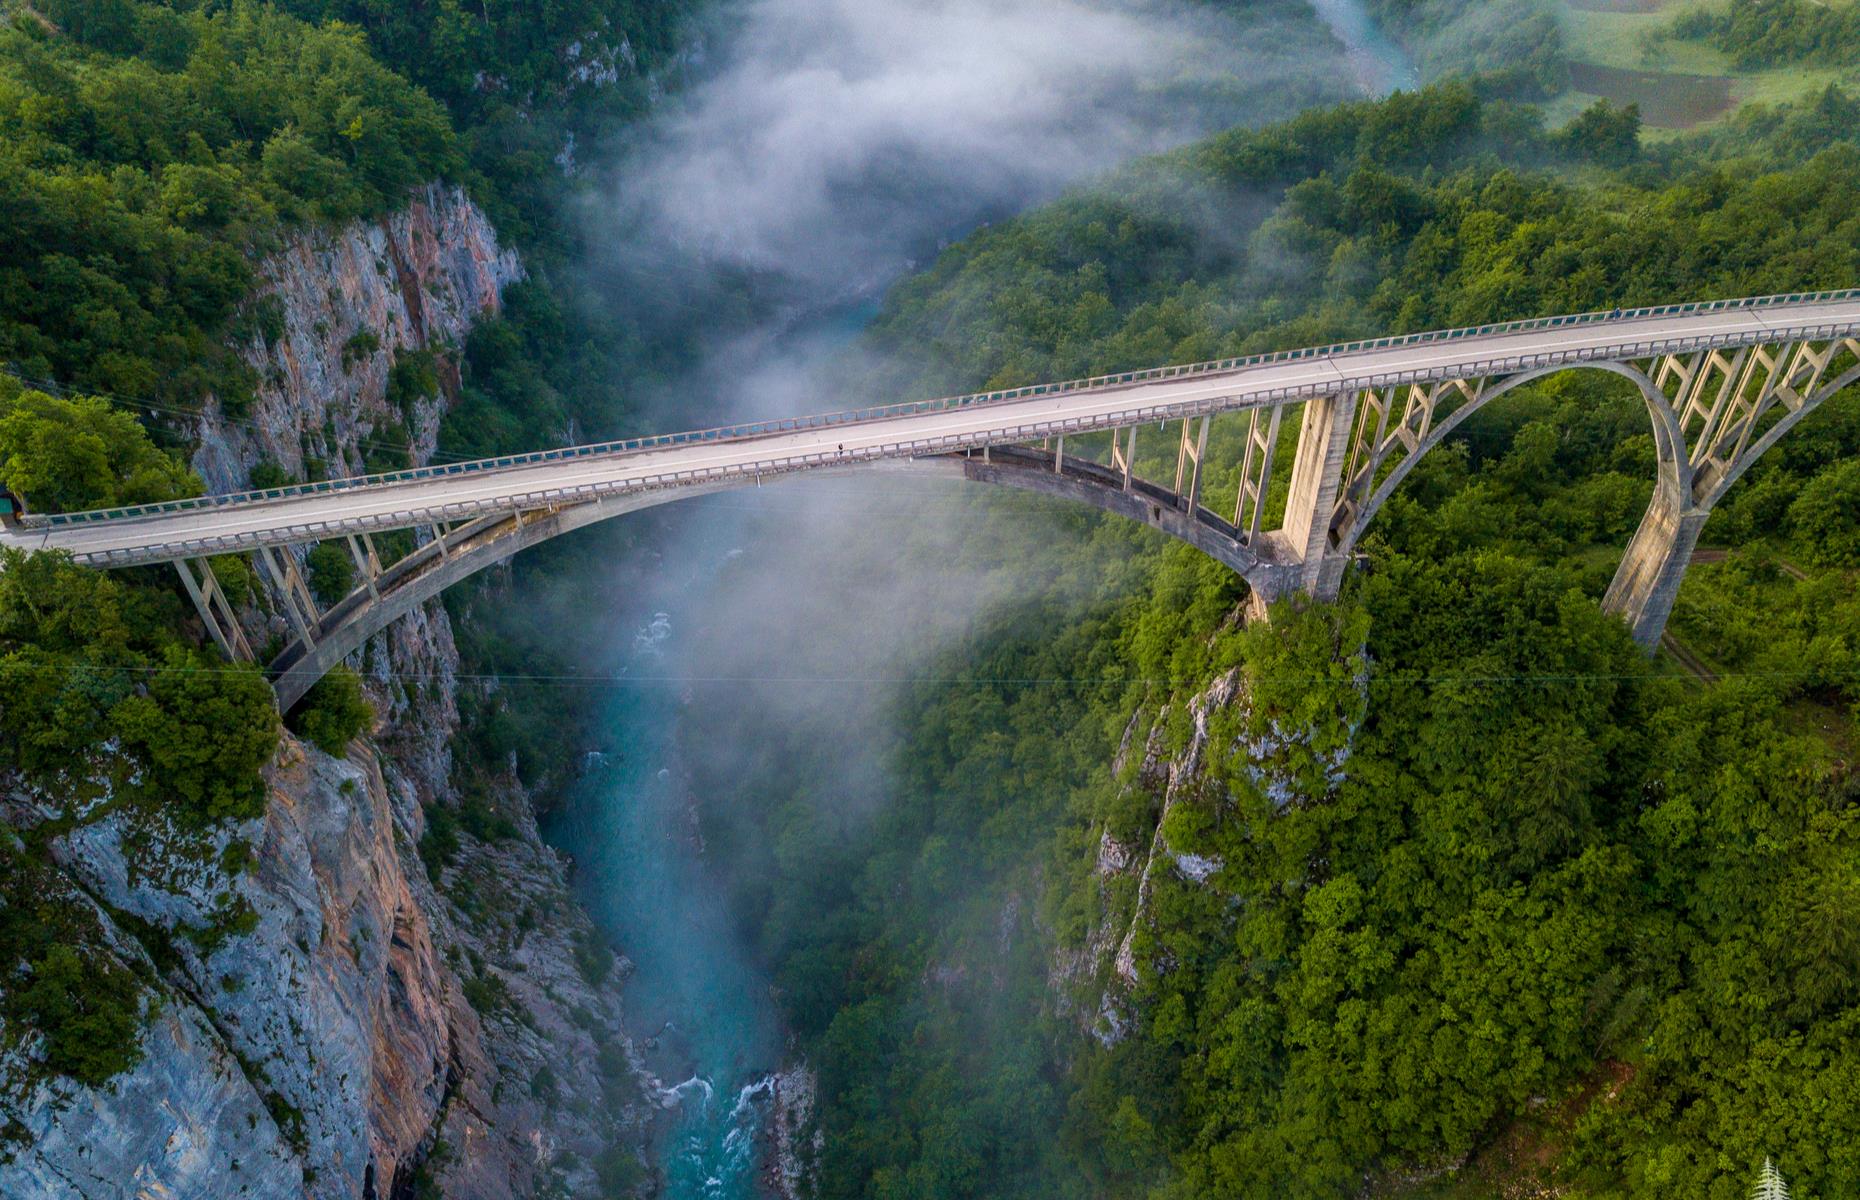 <p>Spanning the Tara River in northern Montenegro, historic Djurdjevica bridge is one of the country's most spectacular sights and a wonder to drive across. Gaze across at the hills, river and at the gaping canyon below. The lofty arched bridge was built between 1939 and 1940 and was the biggest vehicular concrete arch bridge in Europe when it was completed. During the Second World War the central arch was detonated to halt the Italian invasion. It was rebuilt in 1946. Discover more of <a href="https://www.loveexploring.com/galleries/65671/29-of-the-worlds-most-beautiful-bridges?page=1">the world's most beautiful bridges here</a>. </p>